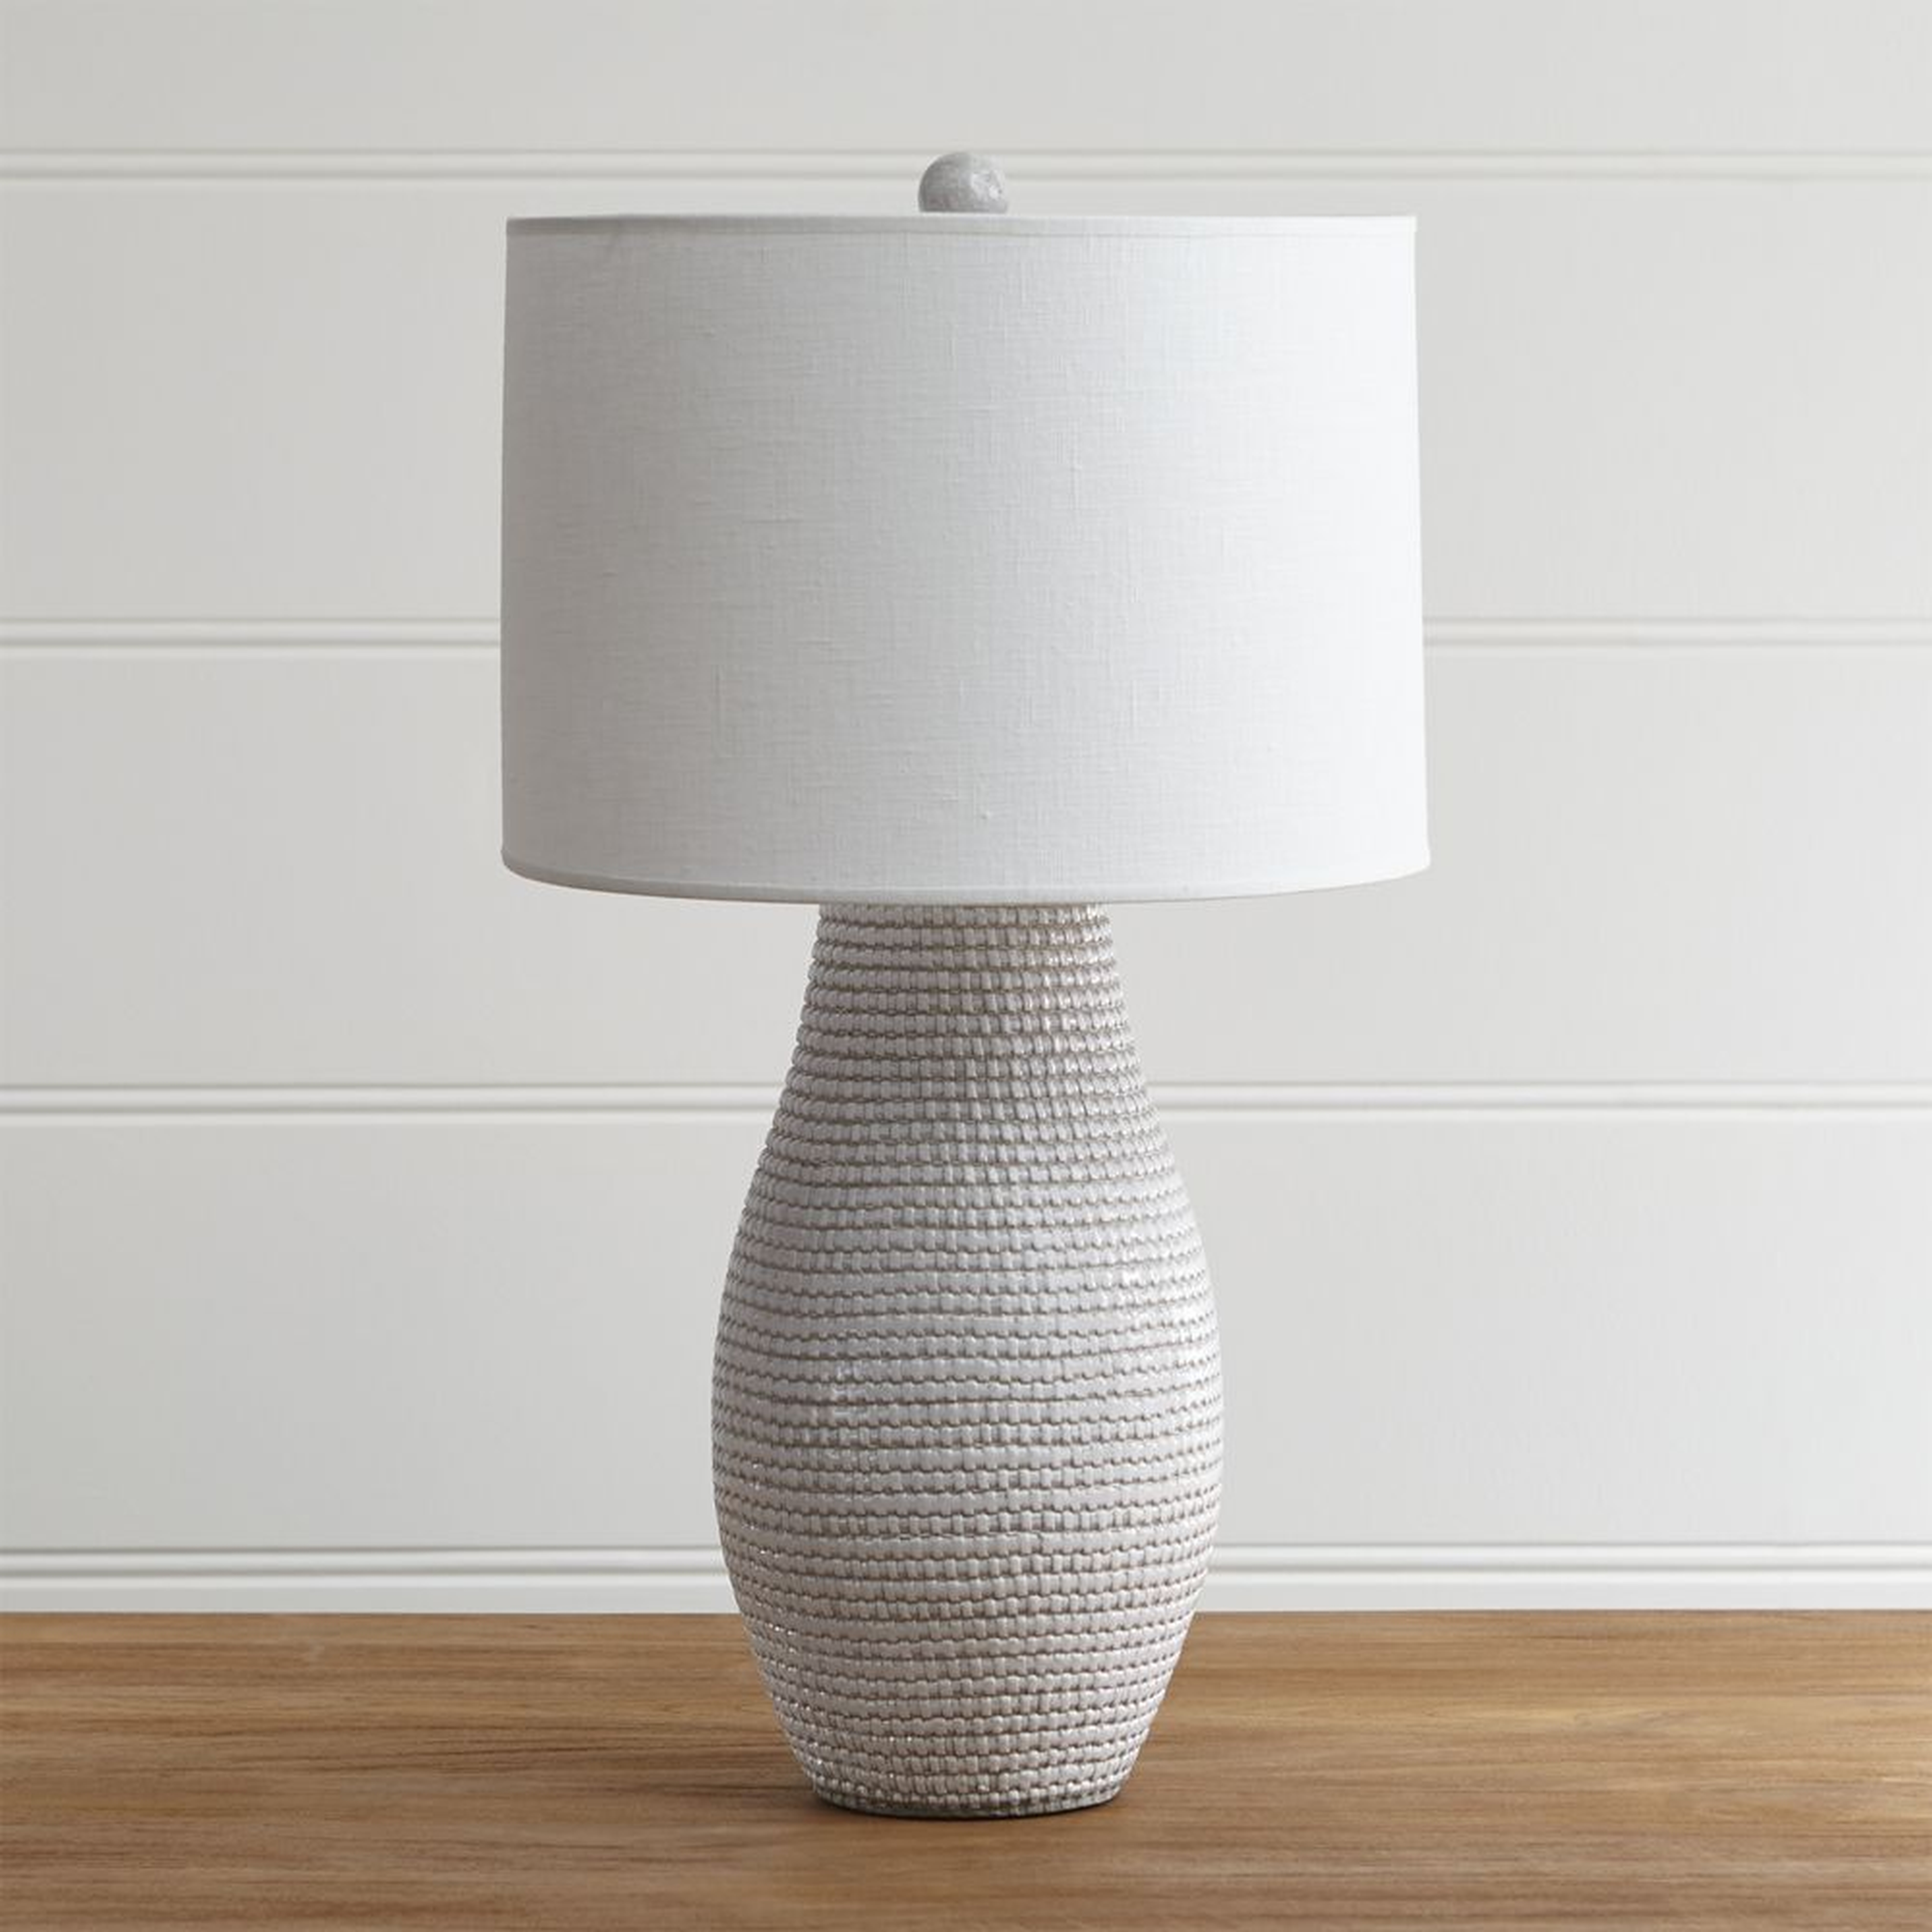 Cane White Ceramic Table Lamp - Crate and Barrel